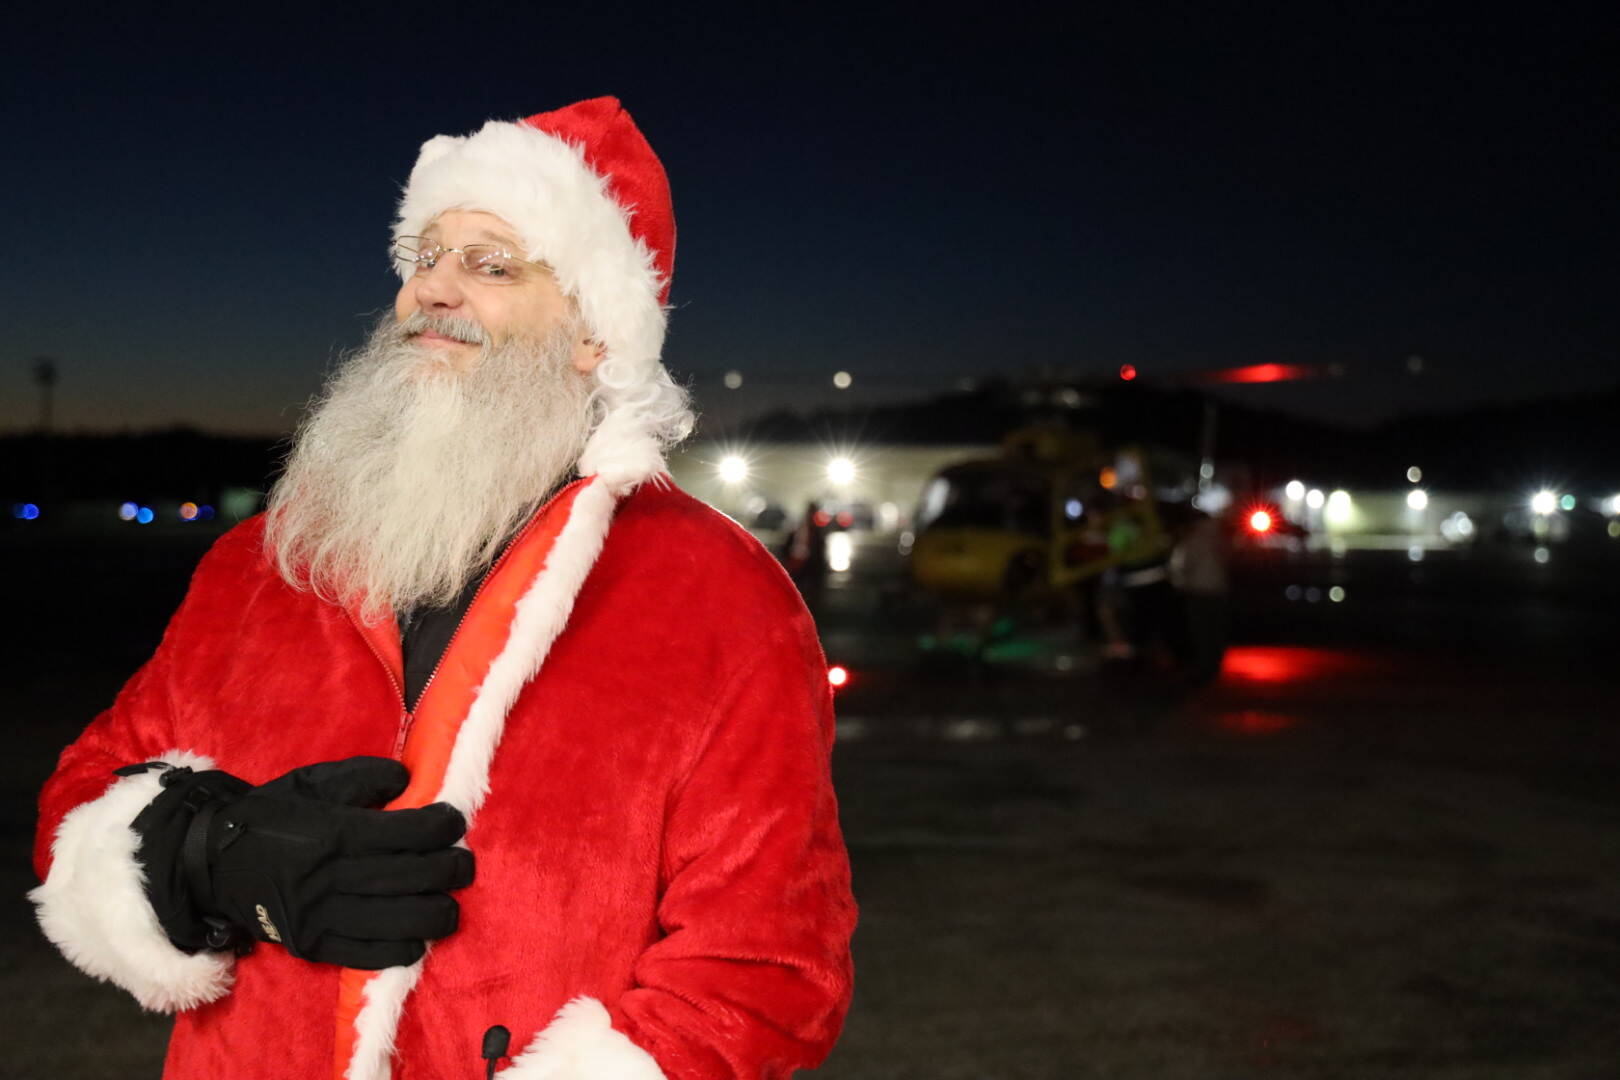 Clarise Larson / Juneau Empire
Santa poses after exiting a helicopter at Juneau International Airport. He reported no reindeer sightings en route to the airport for Christmas Light Flights.